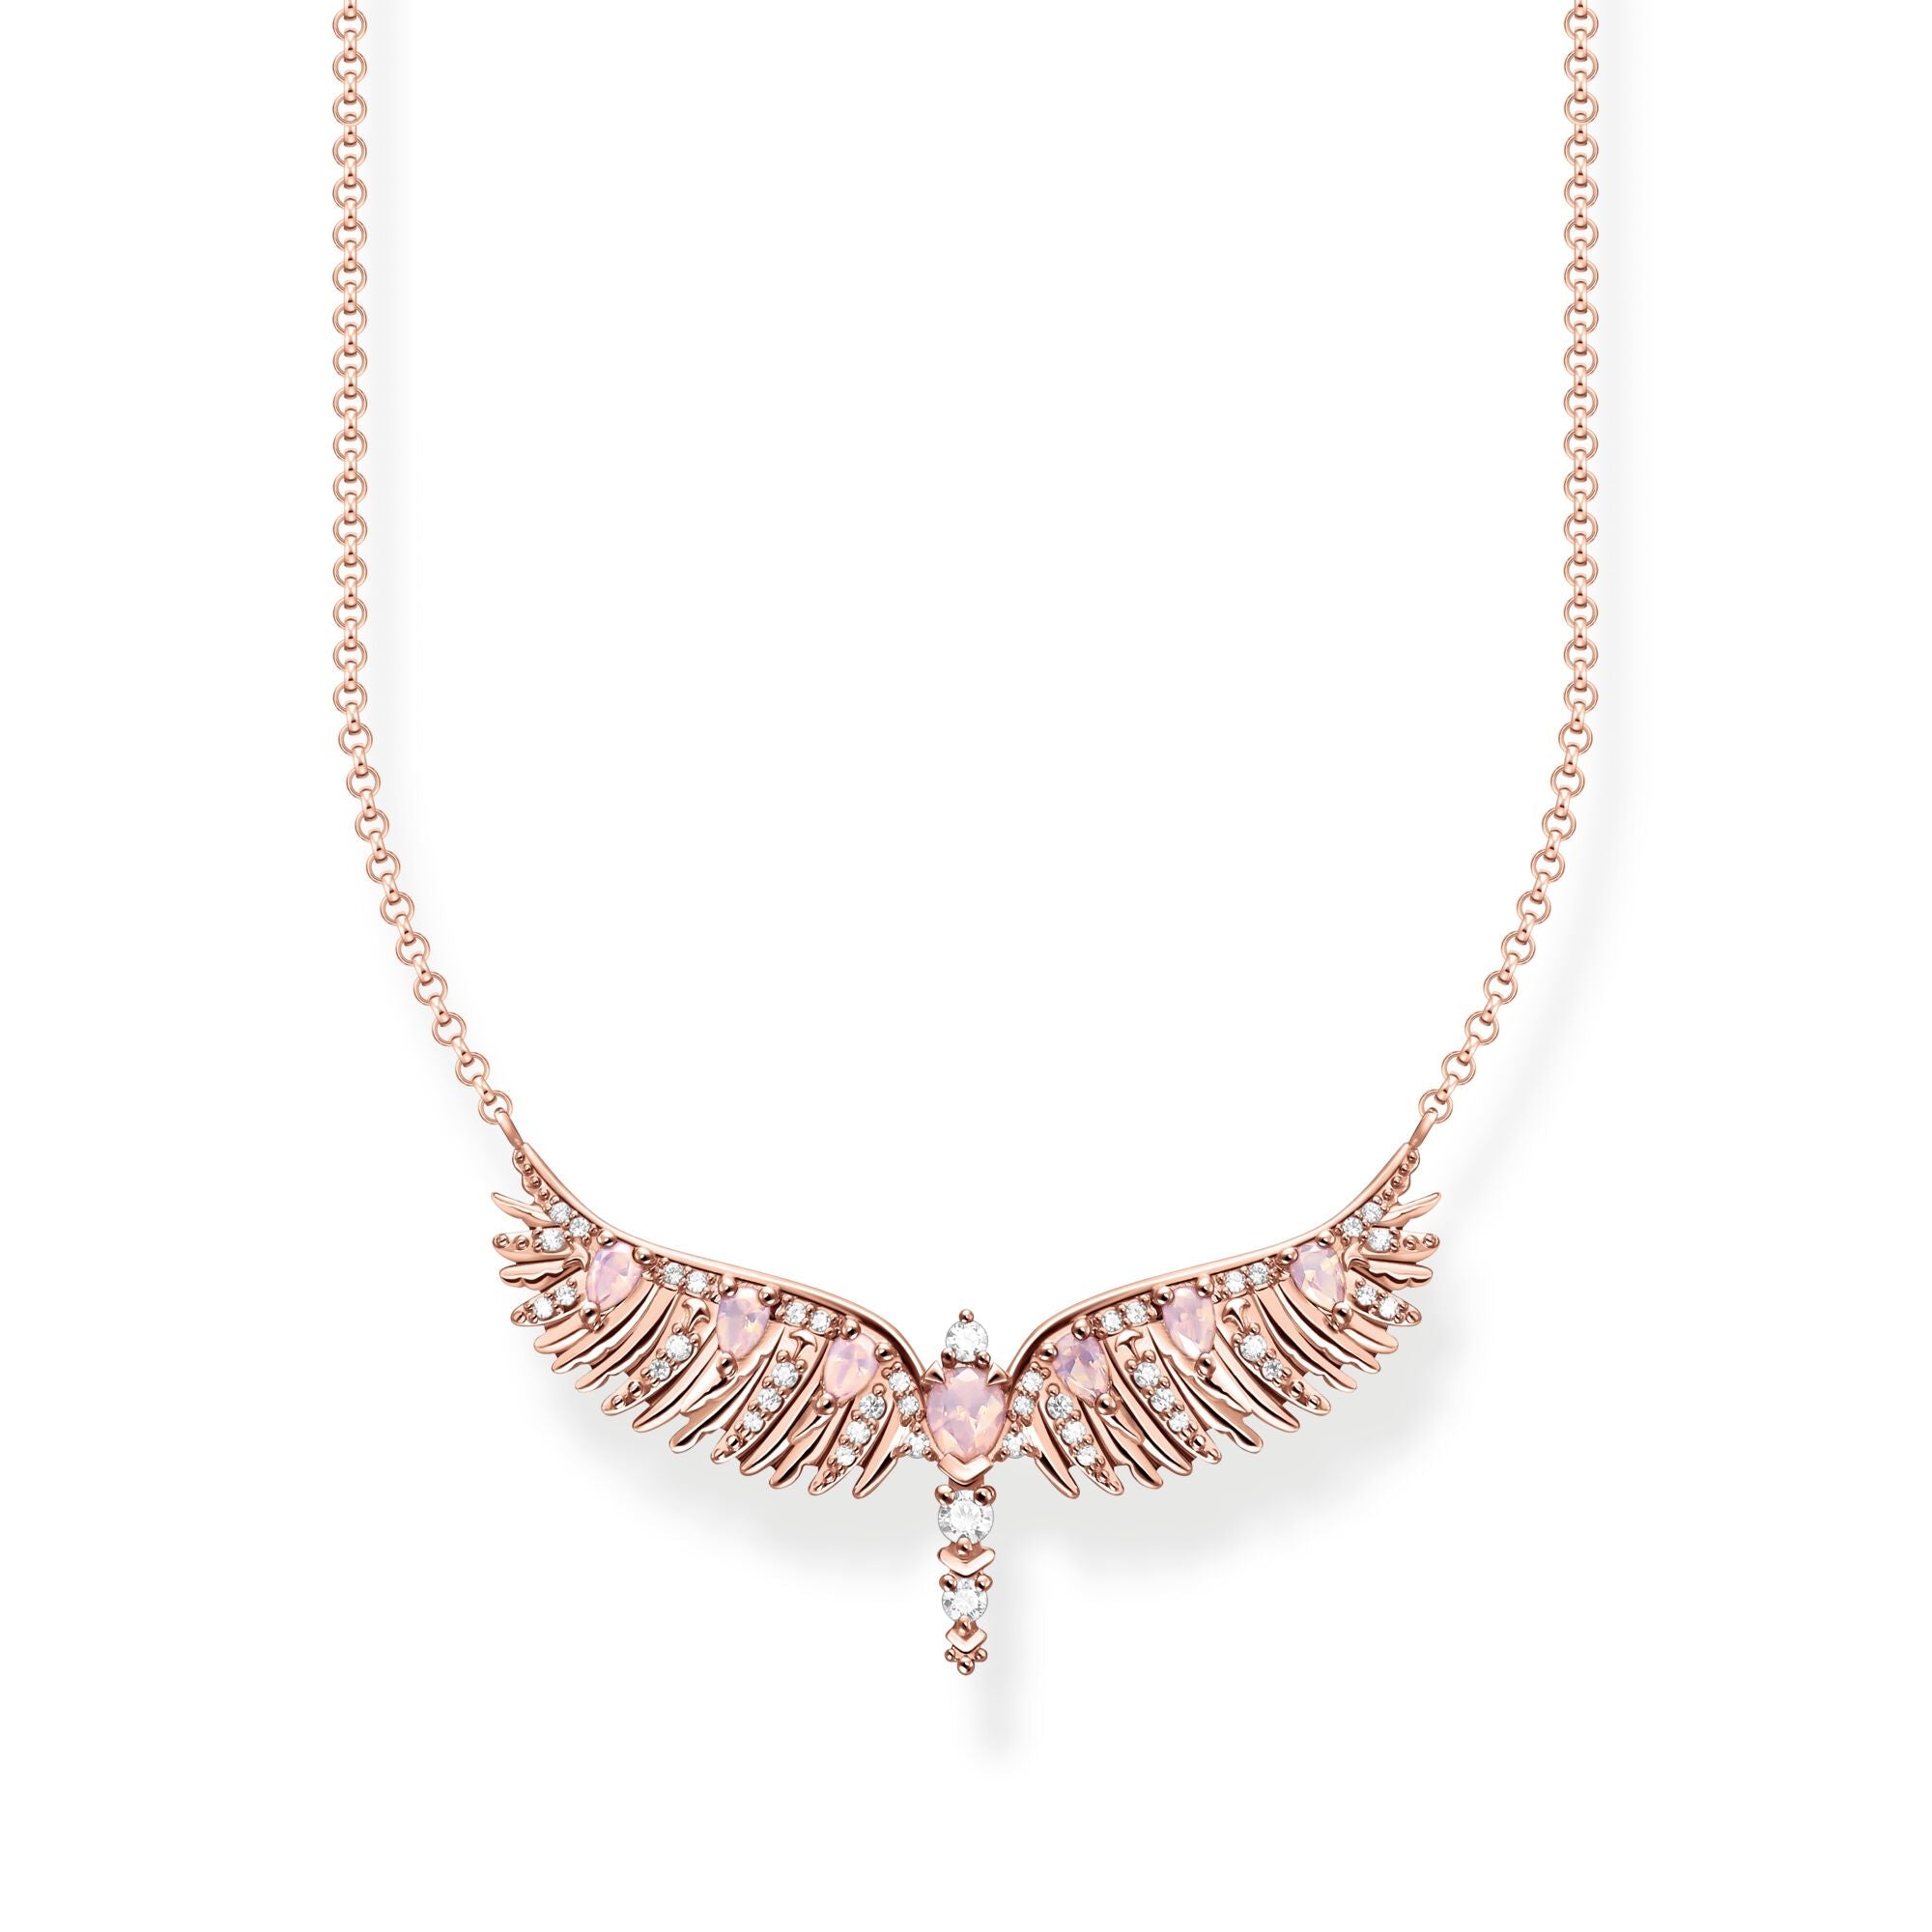 Thomas Sabo Rose Gold Plated Small Sterling Silver Phoenix Wing Pink Stones Necklace